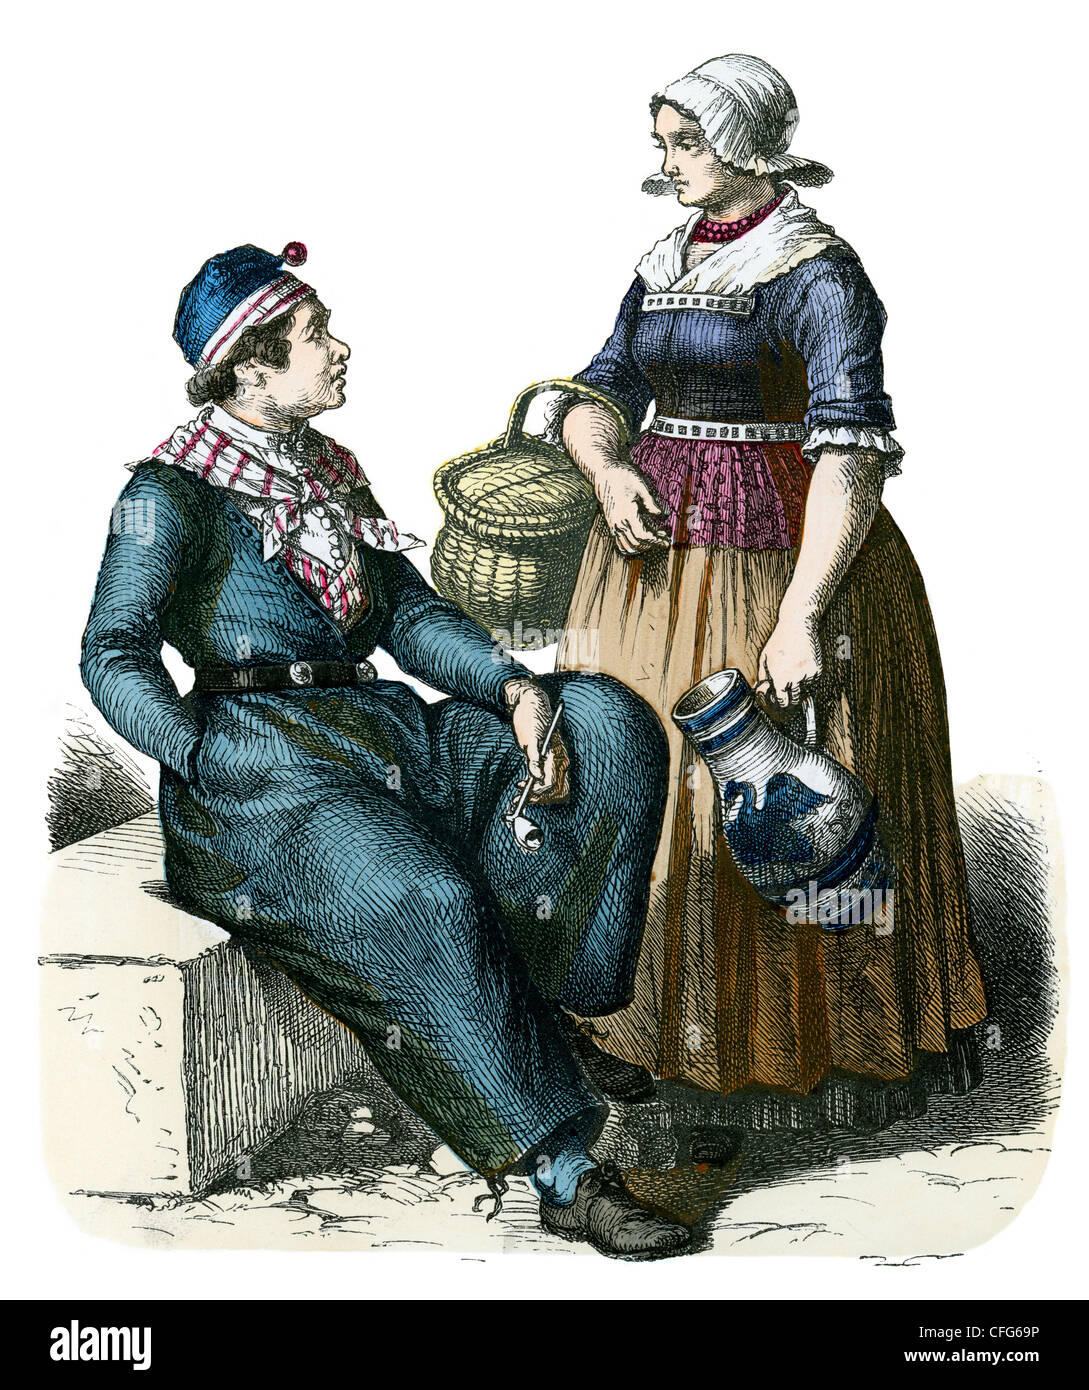 A couple in the traditional costume of Dutch Fisher Folk of the 19th Century Stock Photo